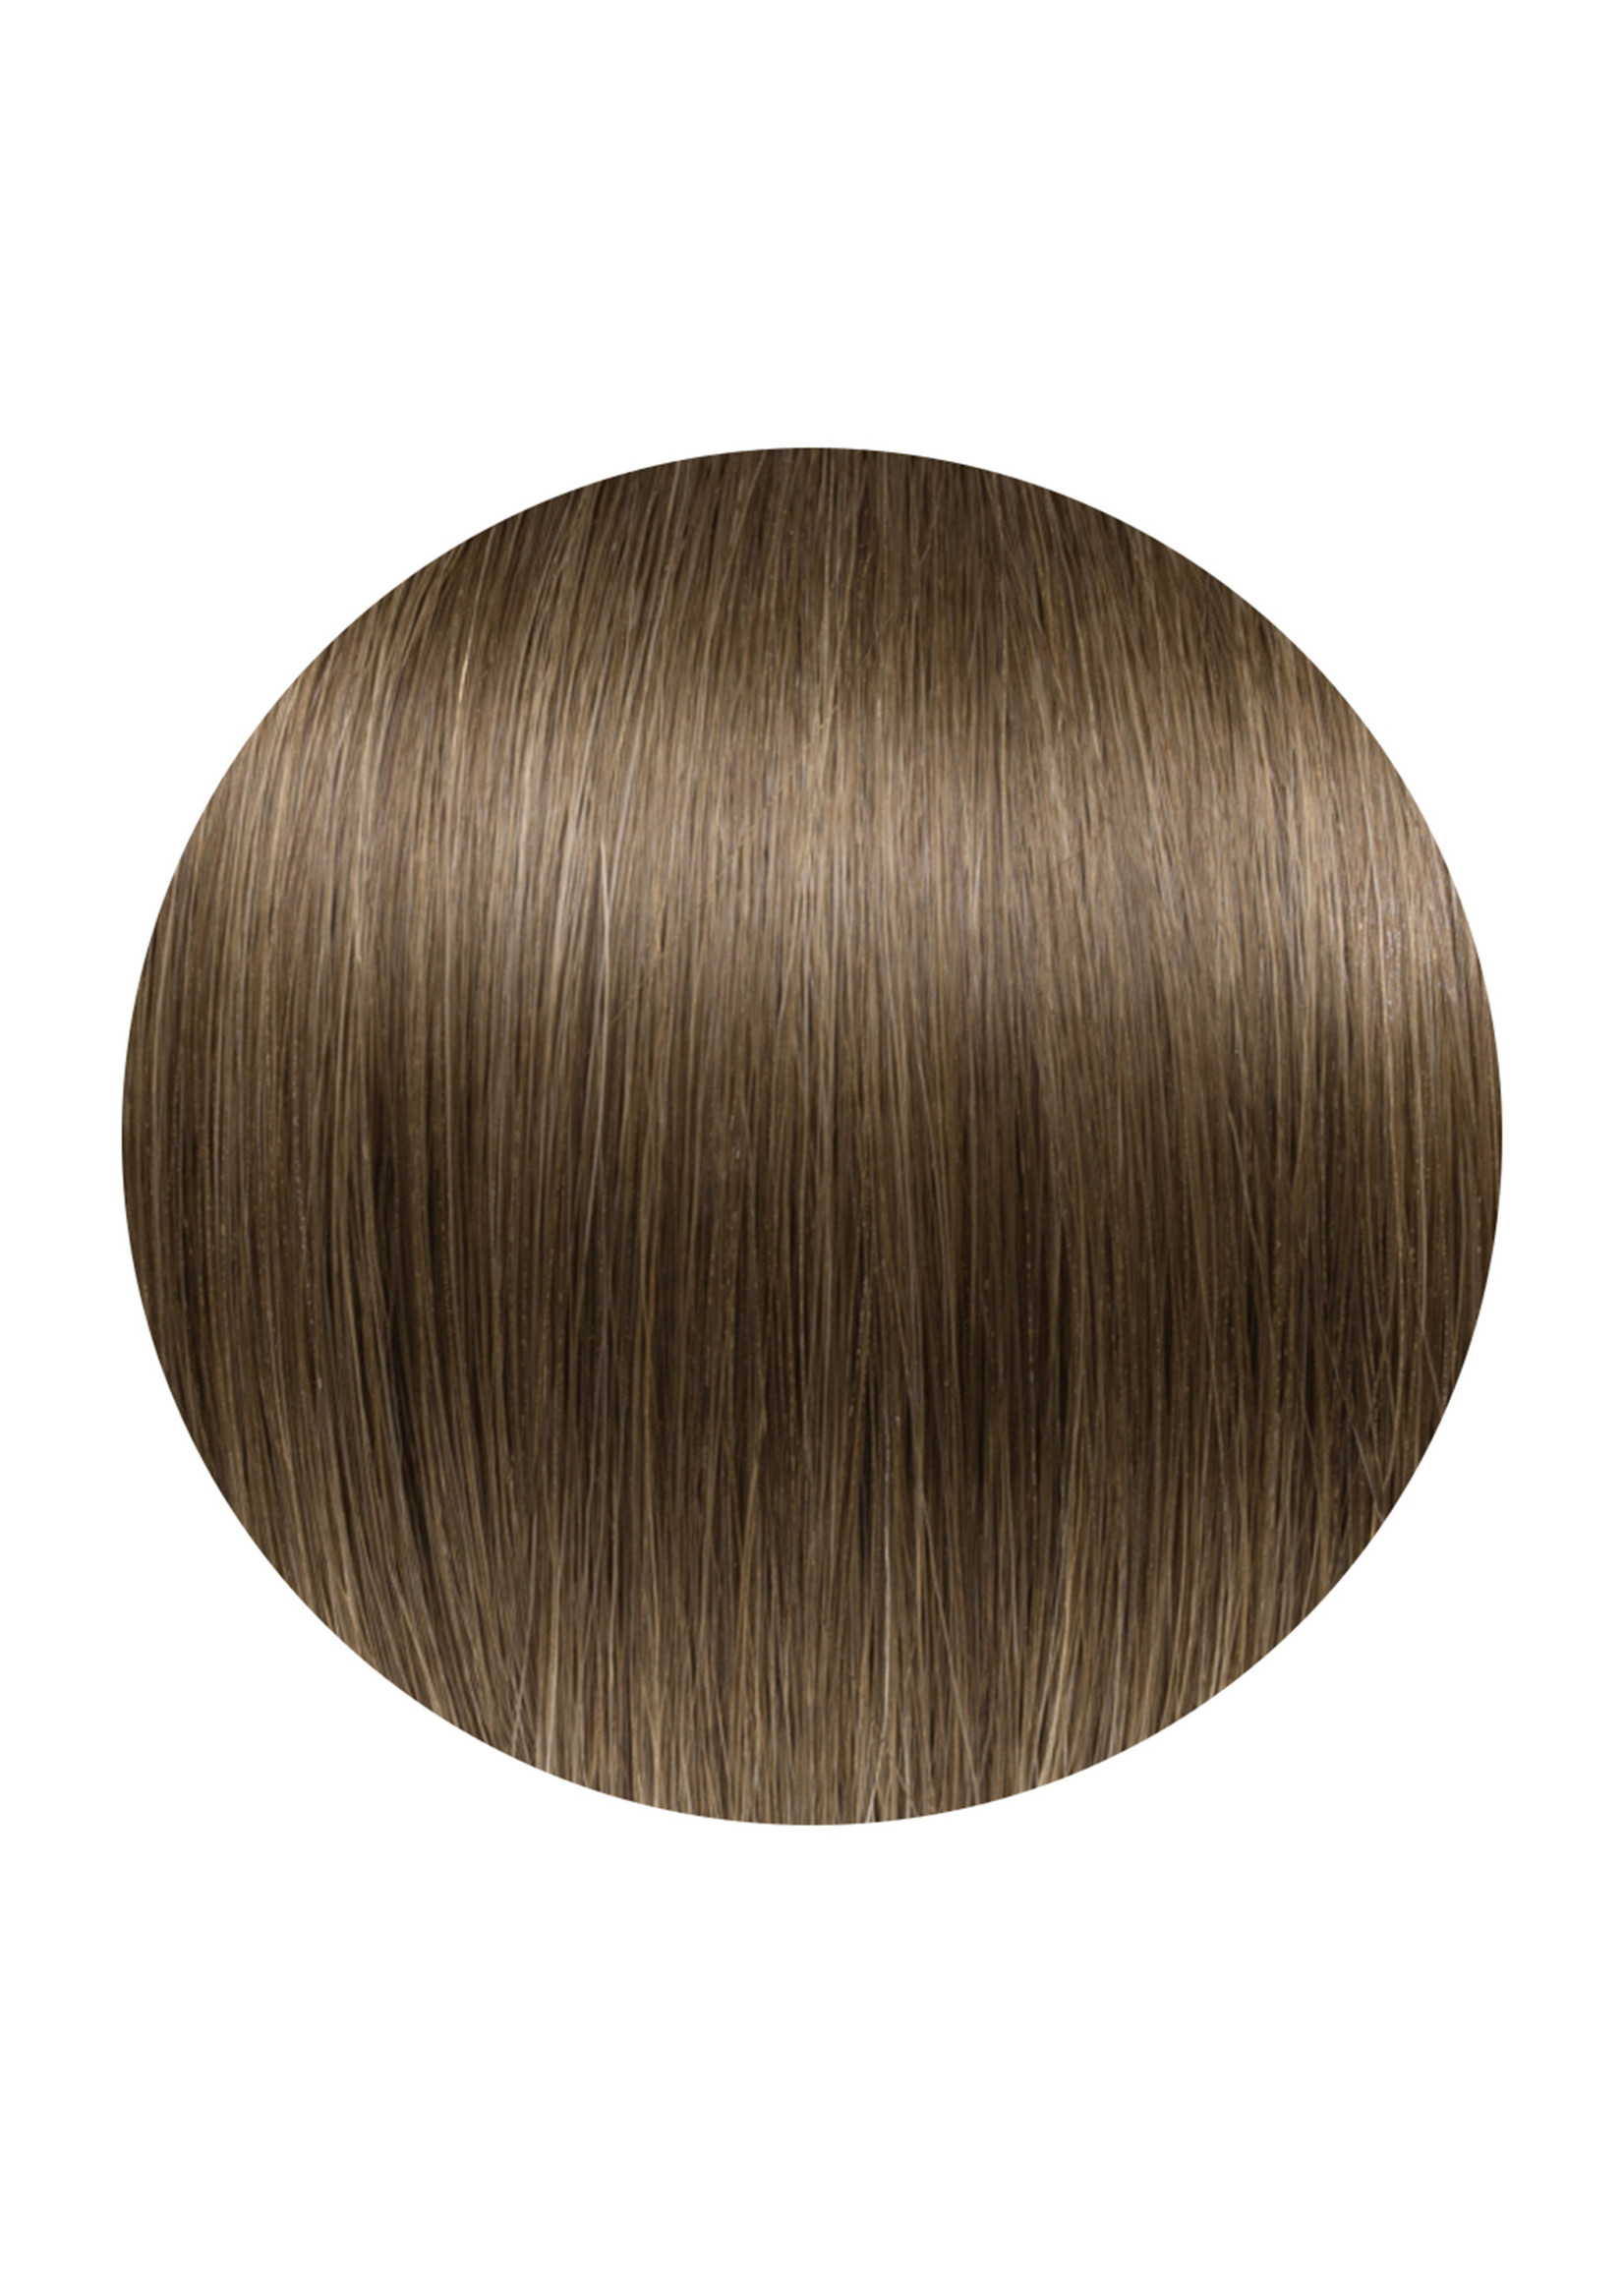 Seamless1 Seamless1 Human Hair Clip-in 1pc Hair Extensions 21.5 Inches - CoffeenCream Balayage